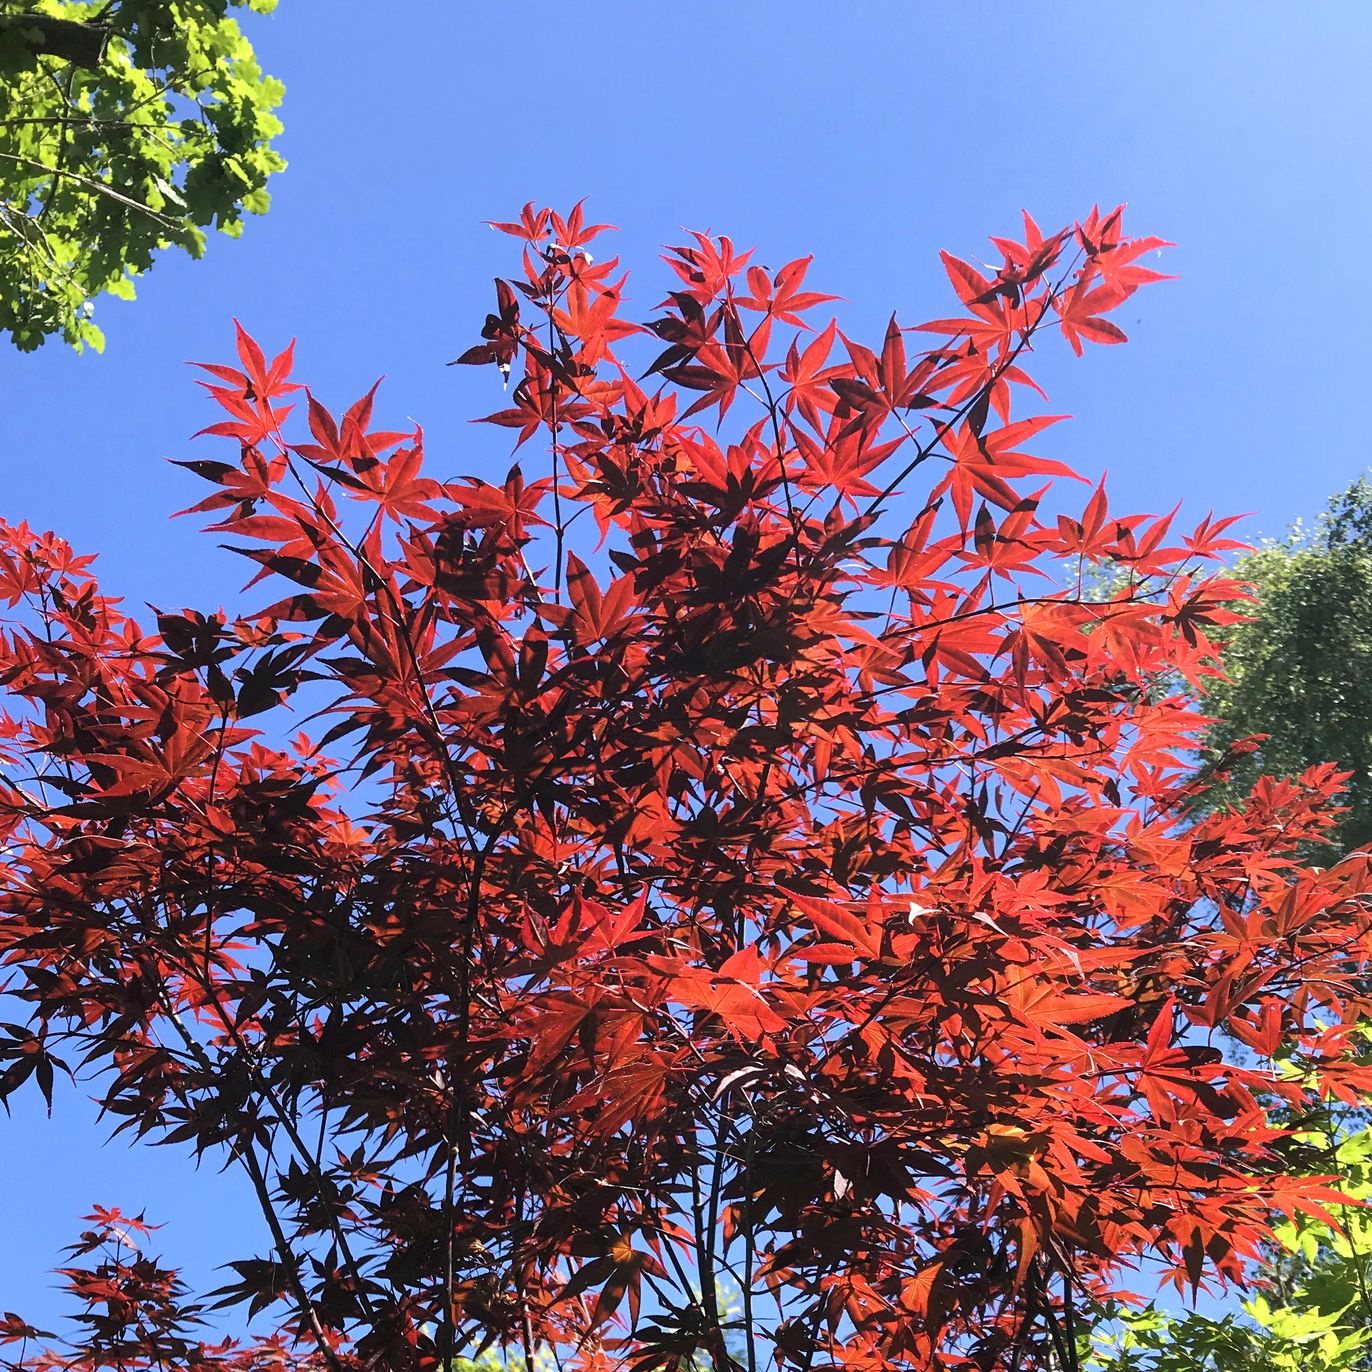 stock photo of bright red japanese maple growing in bright and sunny house garden along with contrasting green foliage with branches and twigs against the blue sky maple trees are easy plant and can be grown in plant pots and have lush and bright colour leaves